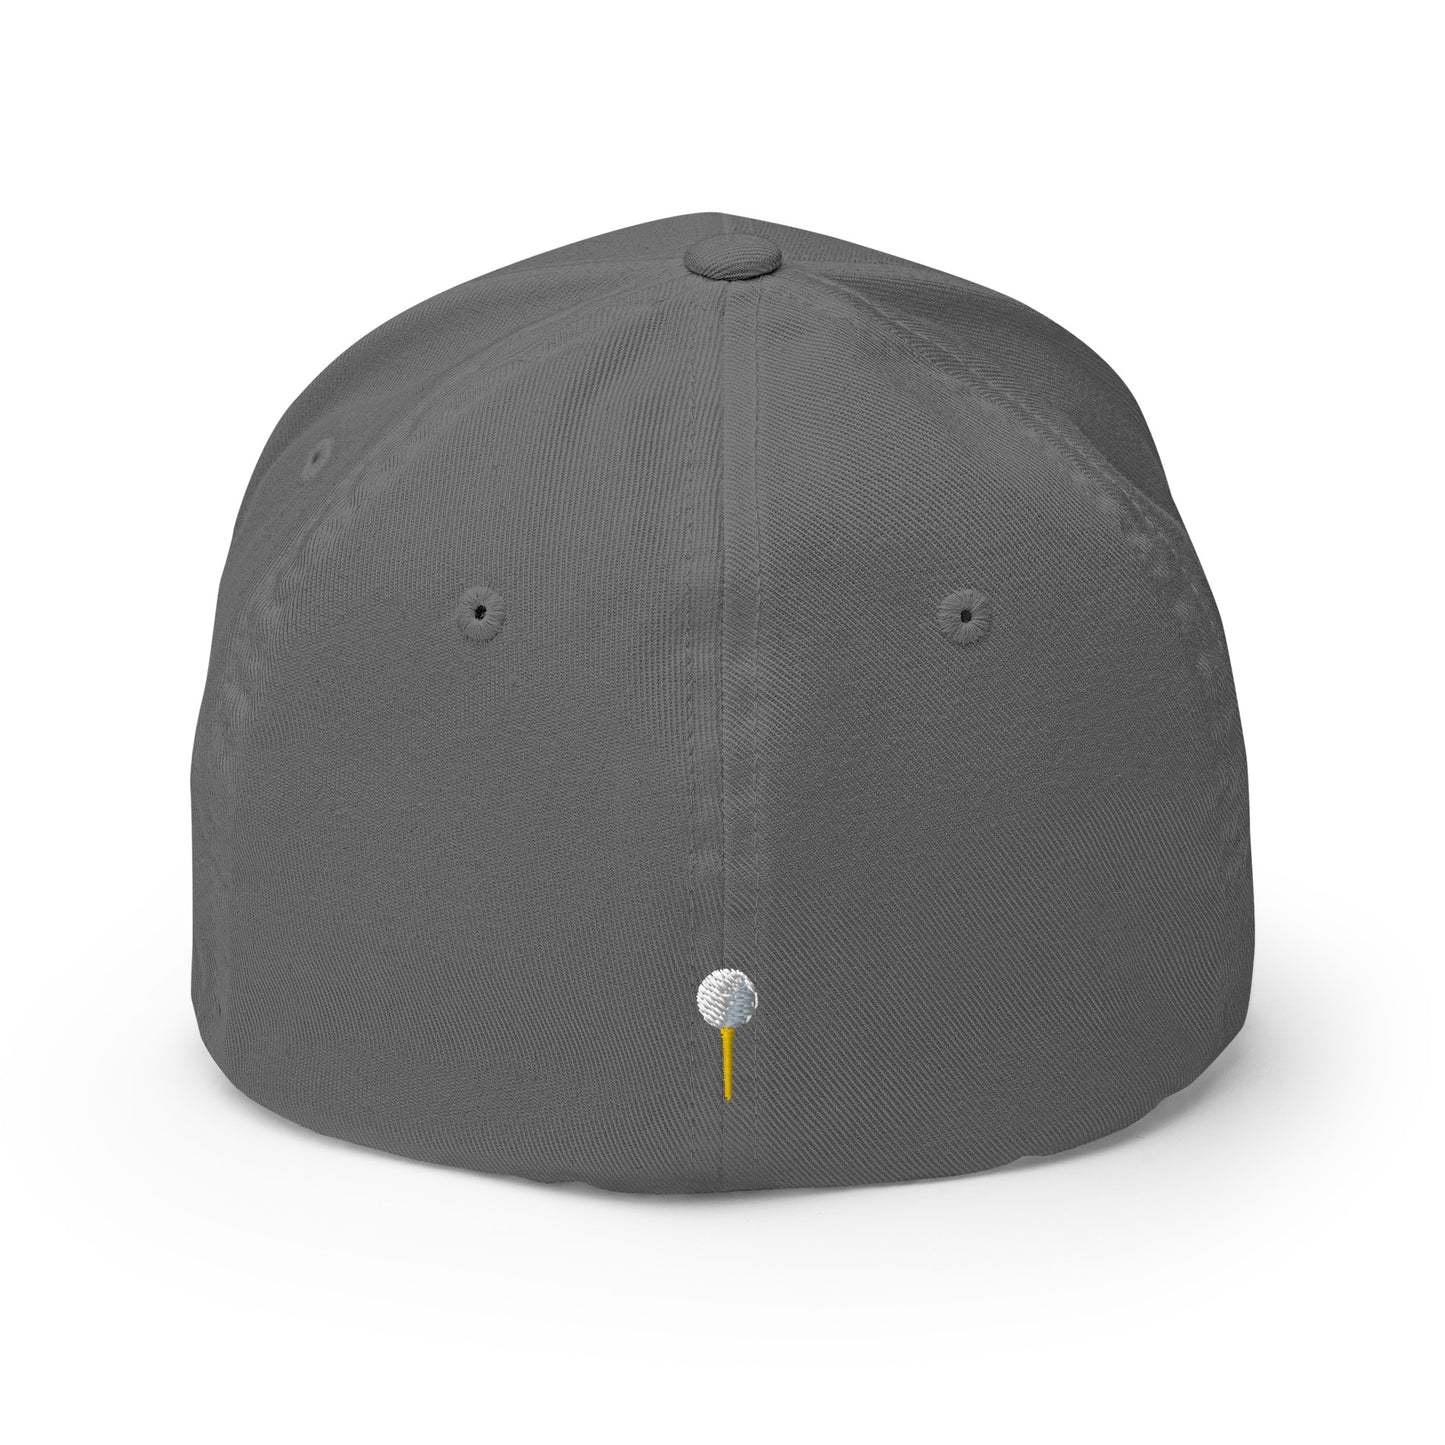 THE "WHO'S YOUR CADDY?" BASEBALL CAP